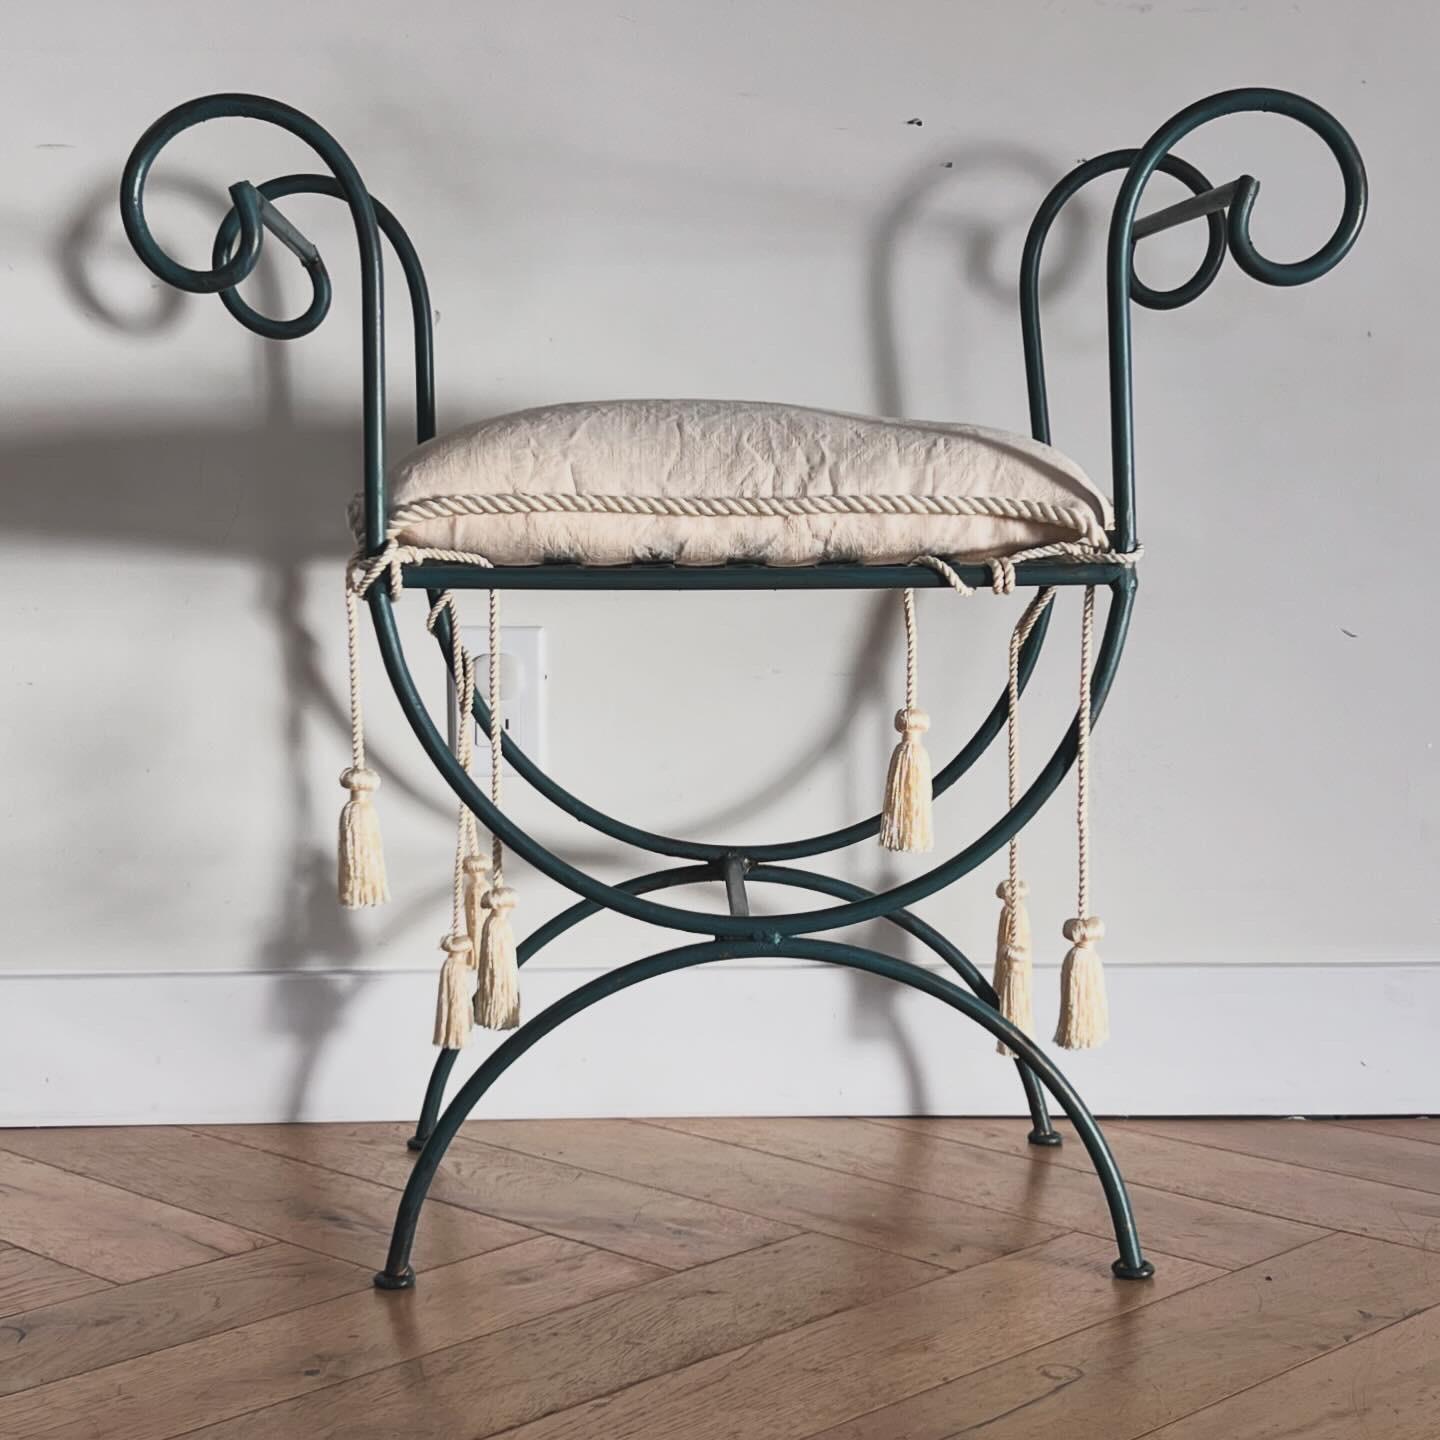 Fabric Vintage iron vanity stool with tasseled seat pillow, 20th century  For Sale